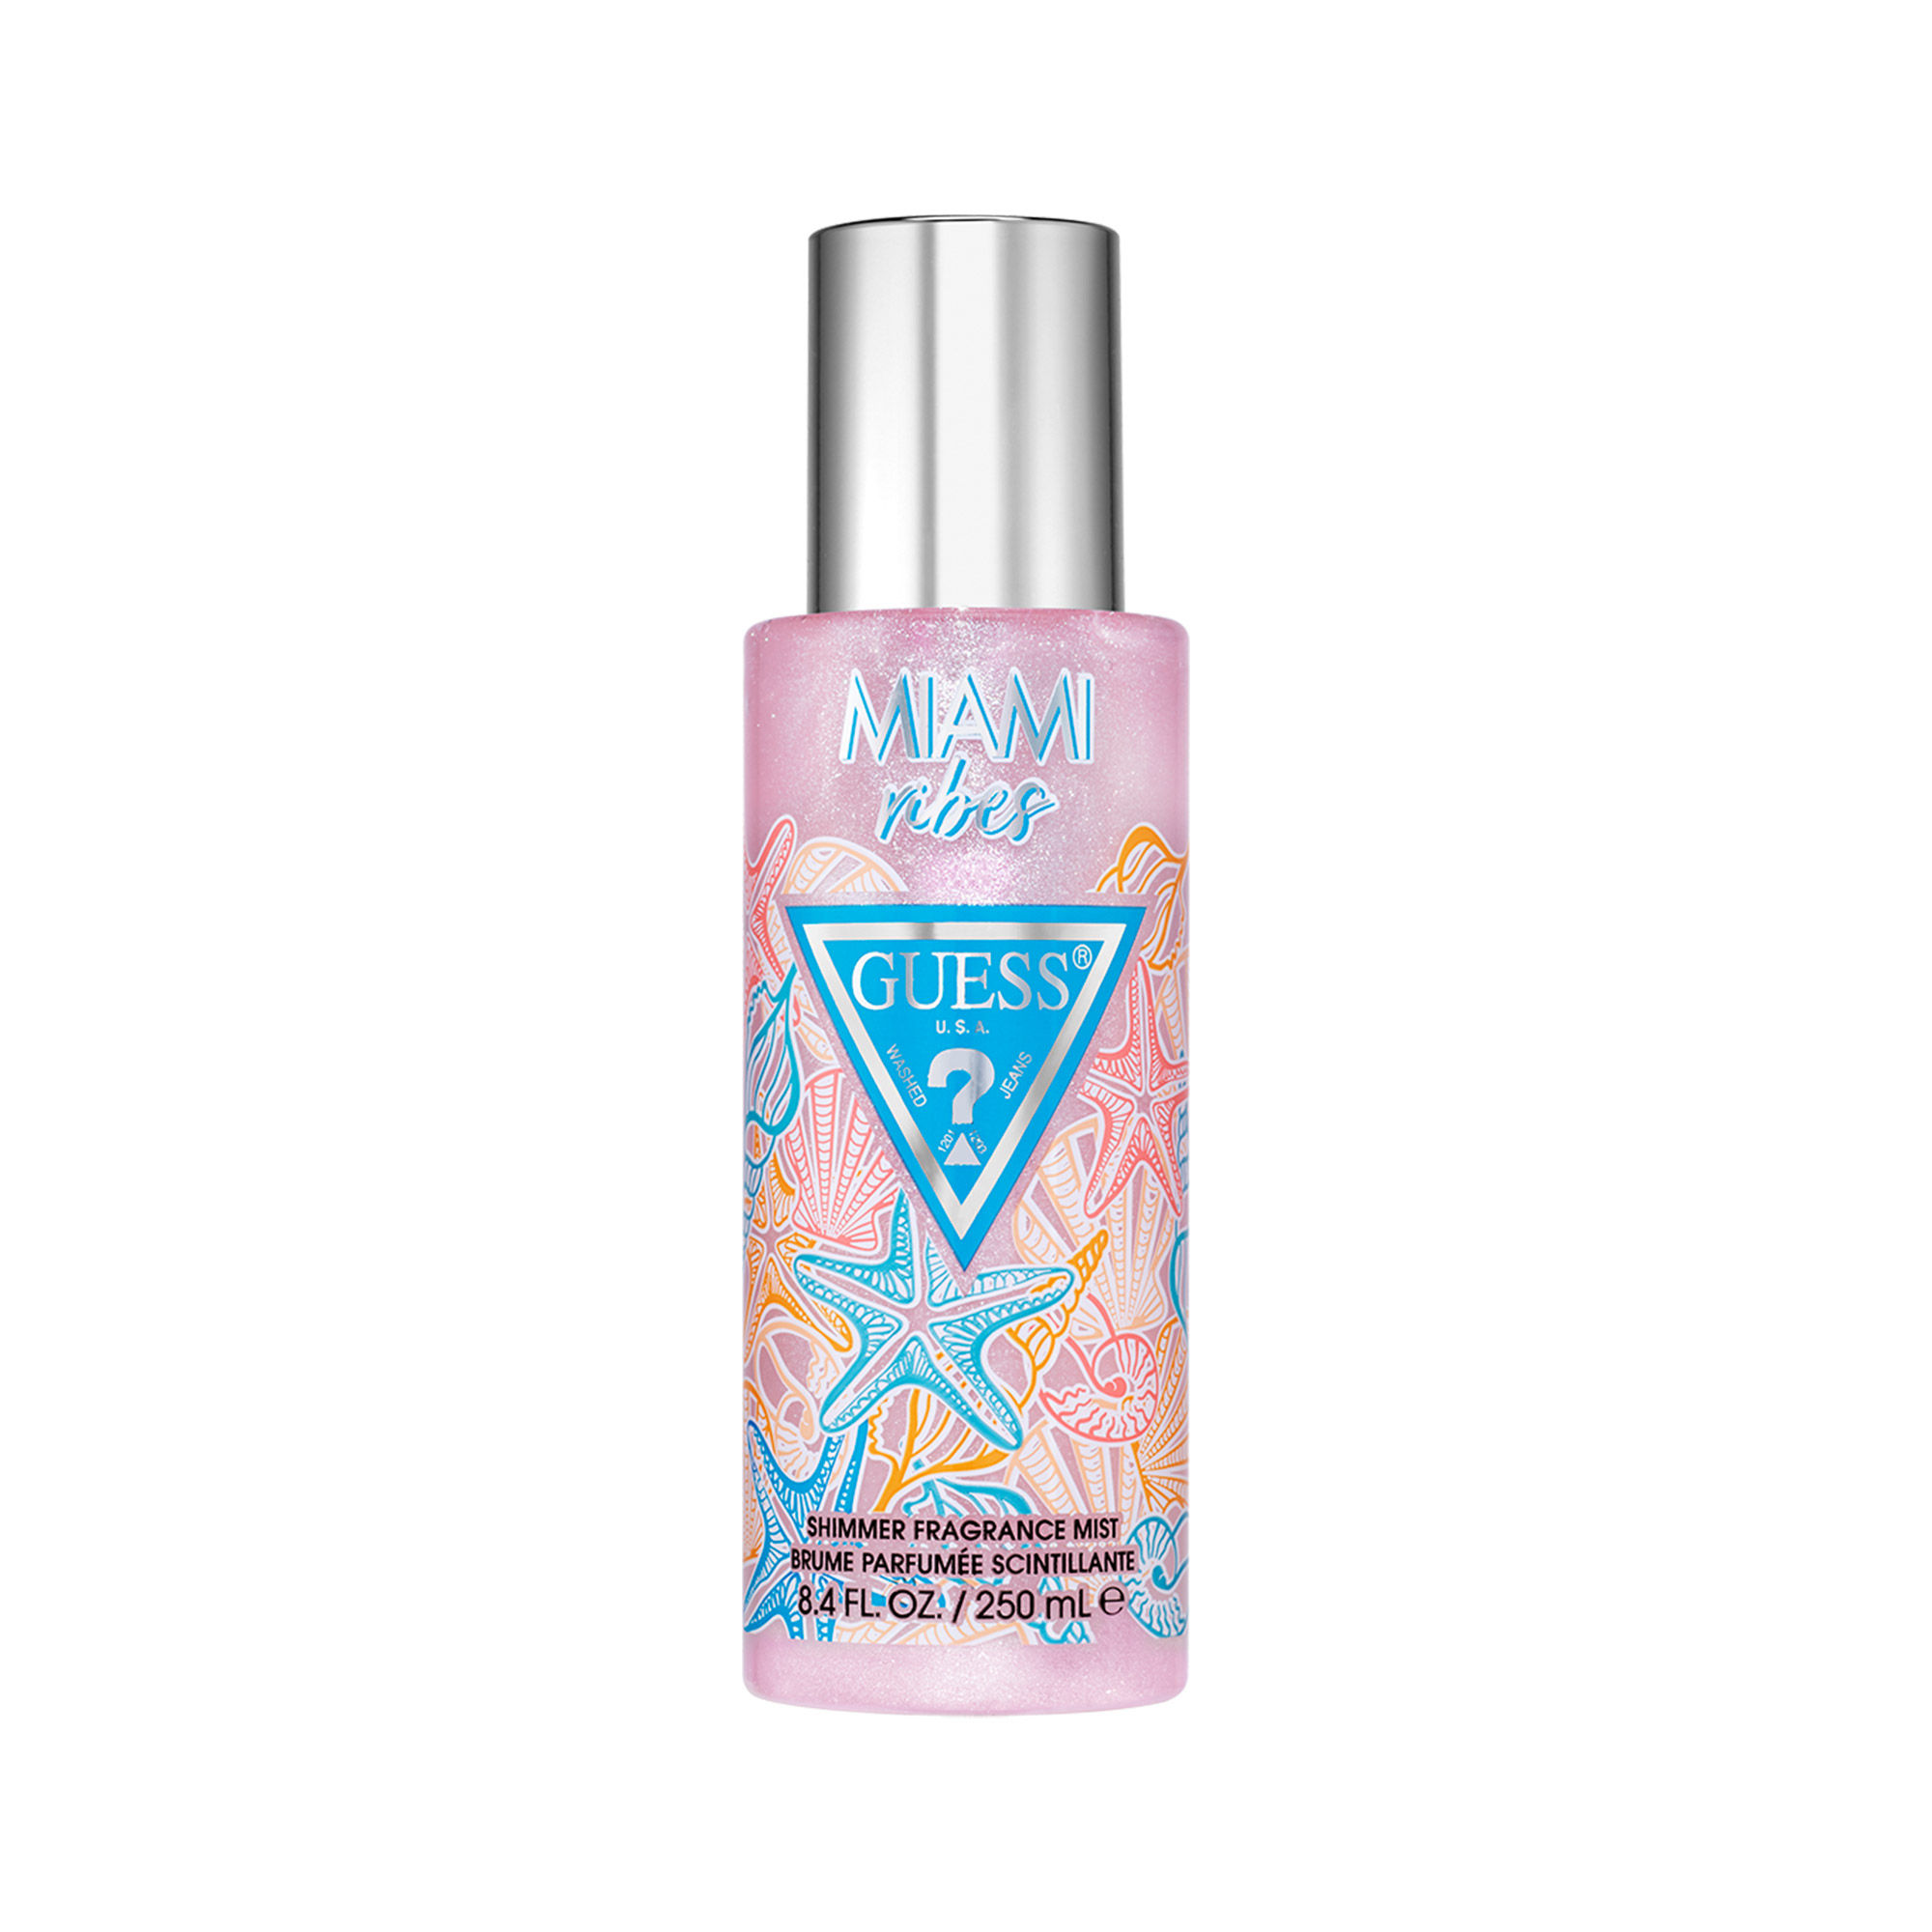 Guess Destination Miami Vibes Shimmer Fragrance Body Mist